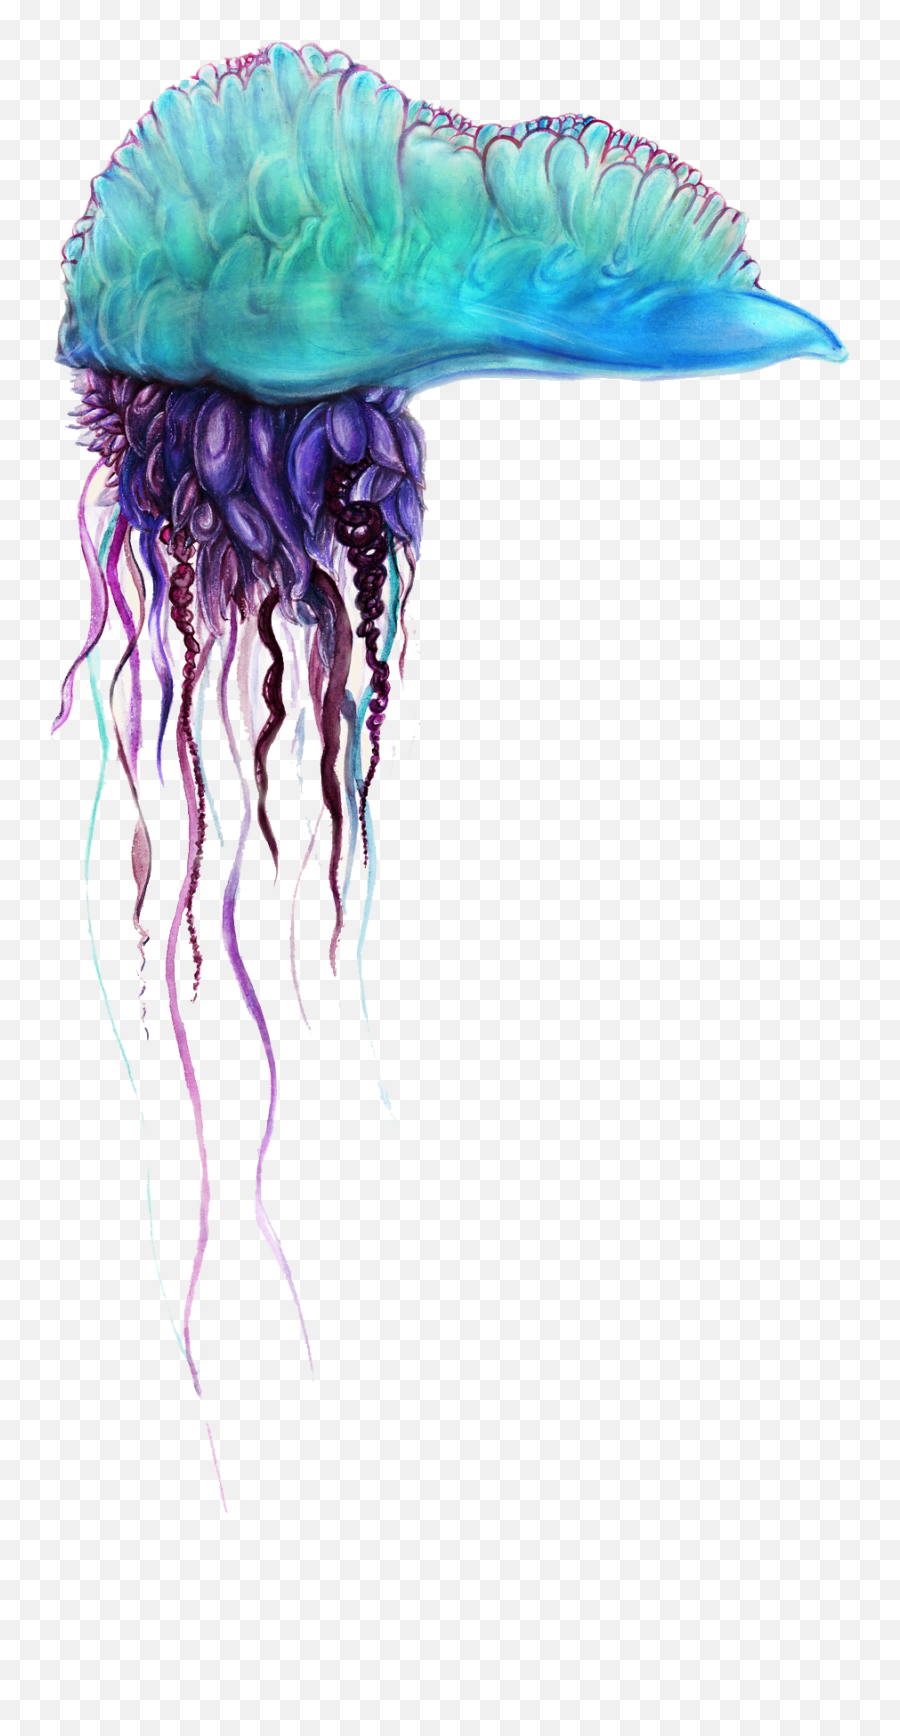 Png Transparent Images Free Download Jellyfish